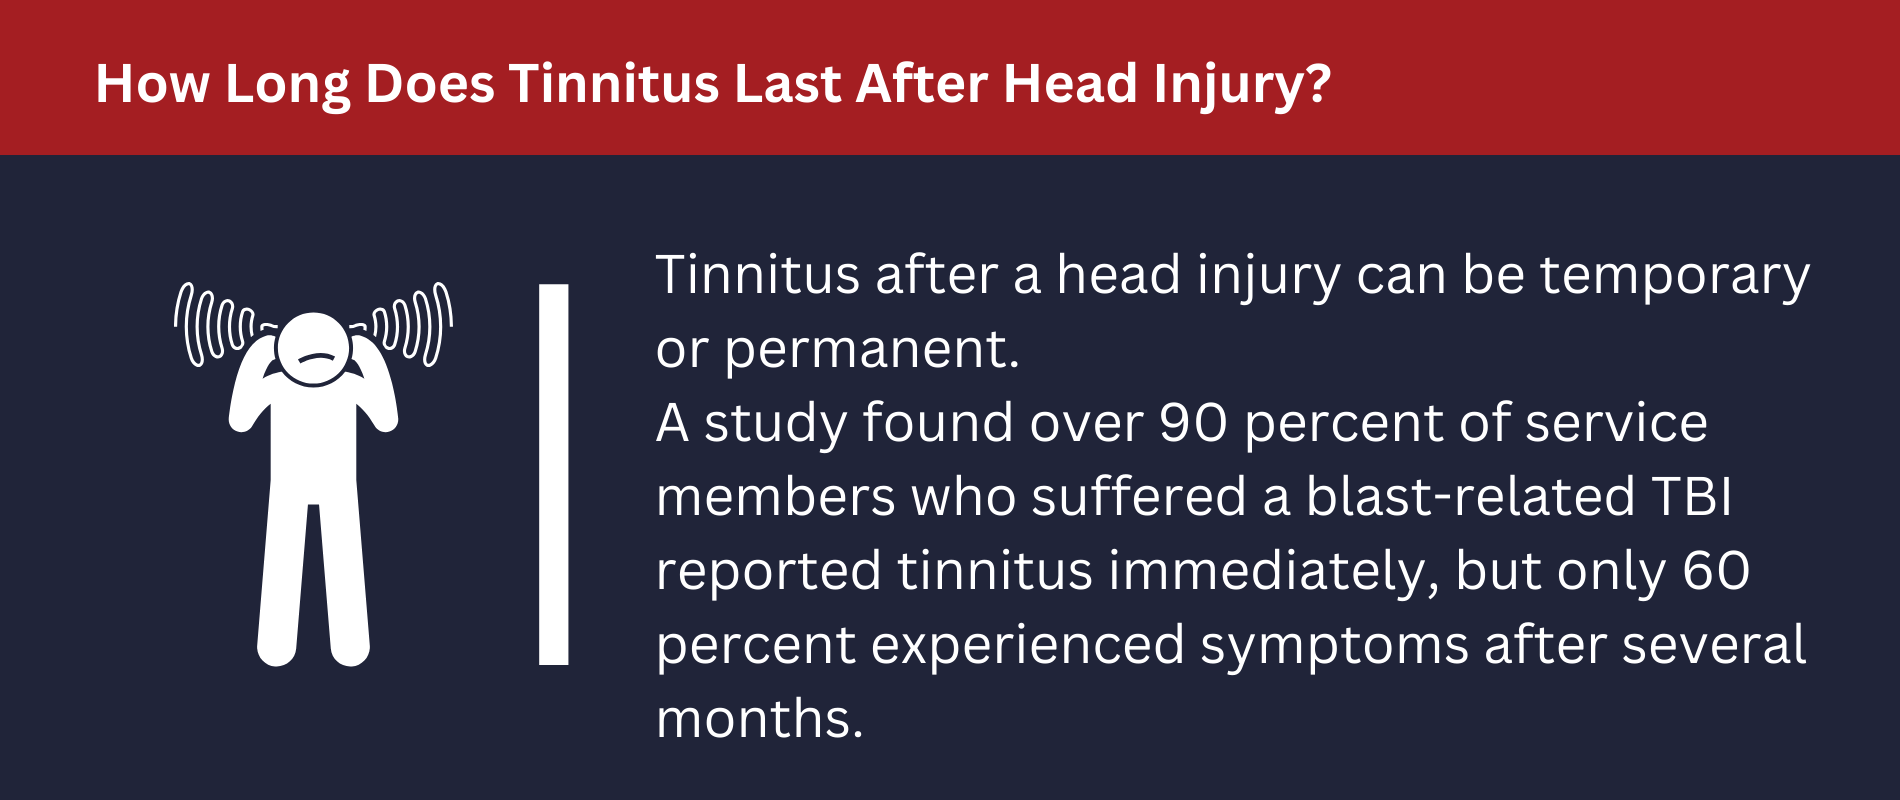 How Long Does Tinnitus Last After Head Injury